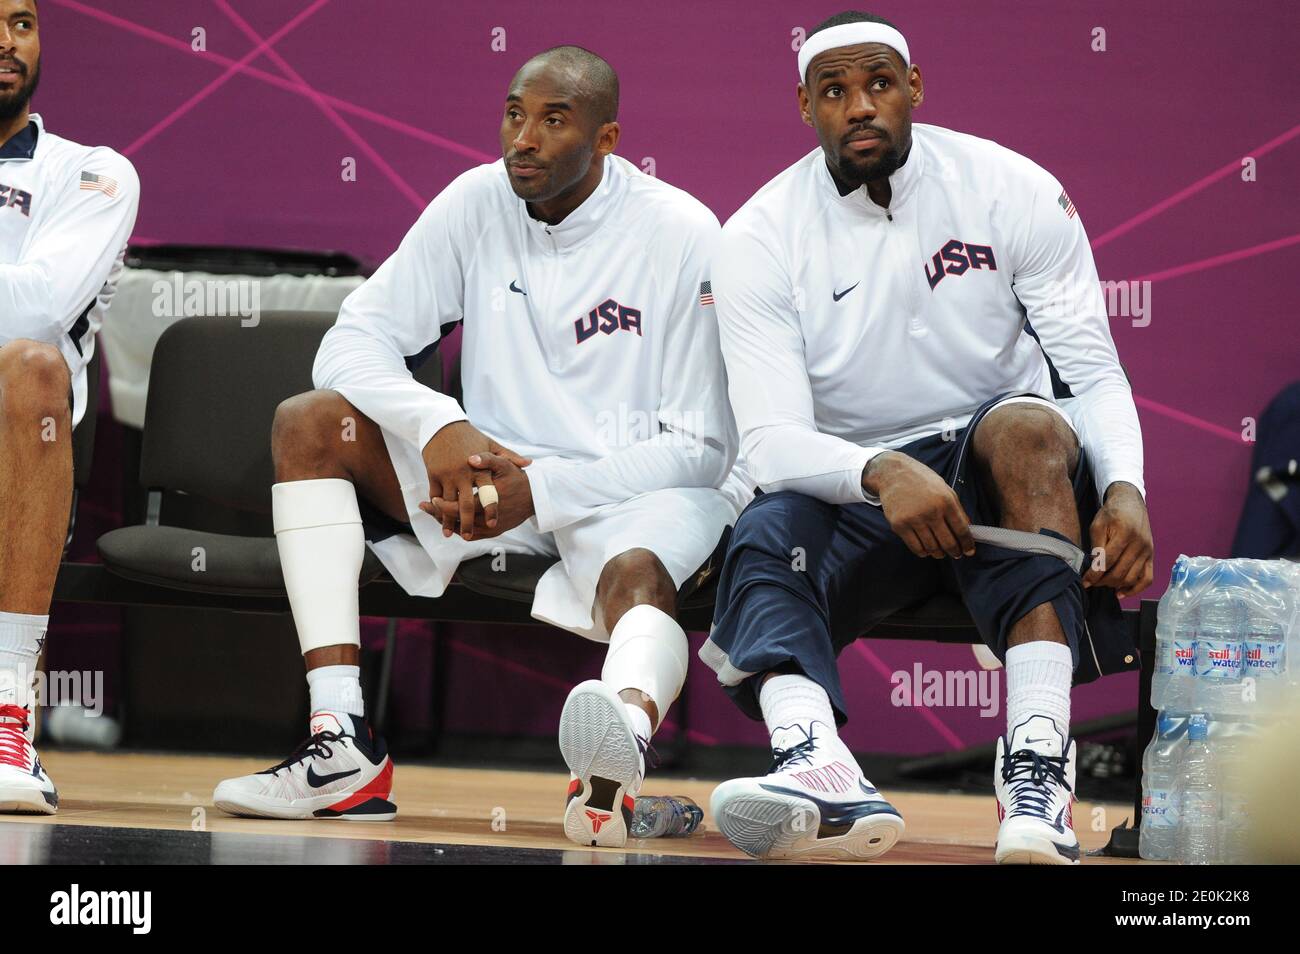 When LeBron James and Kobe Bryant came together and put Team USA